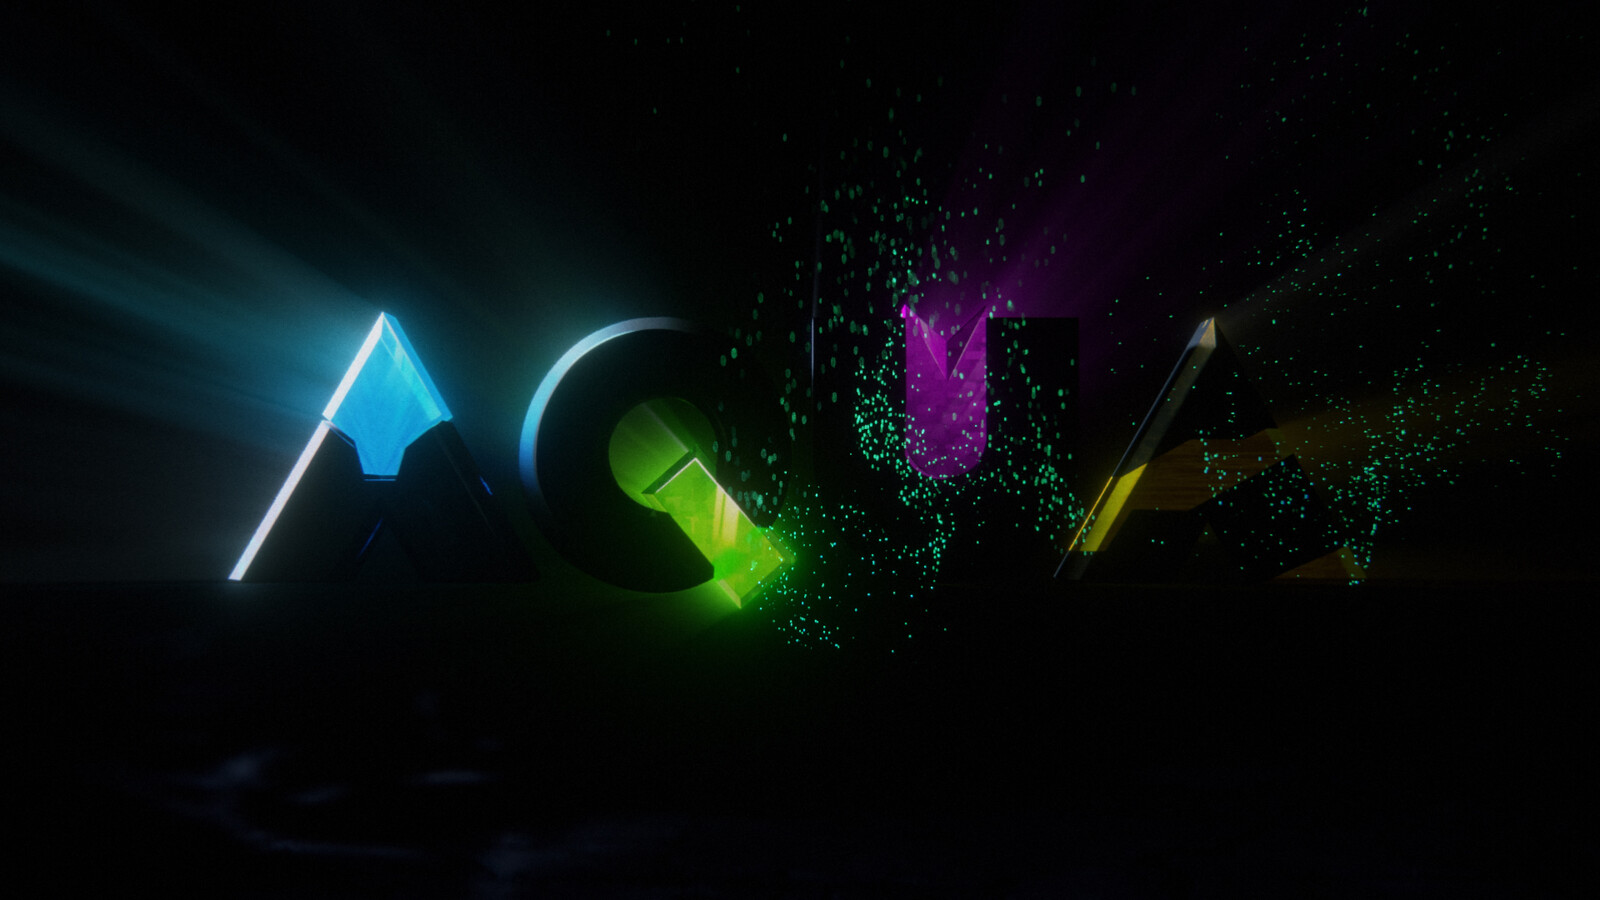 All logo elements were converted to 3D and lit from behind to produce the effect.